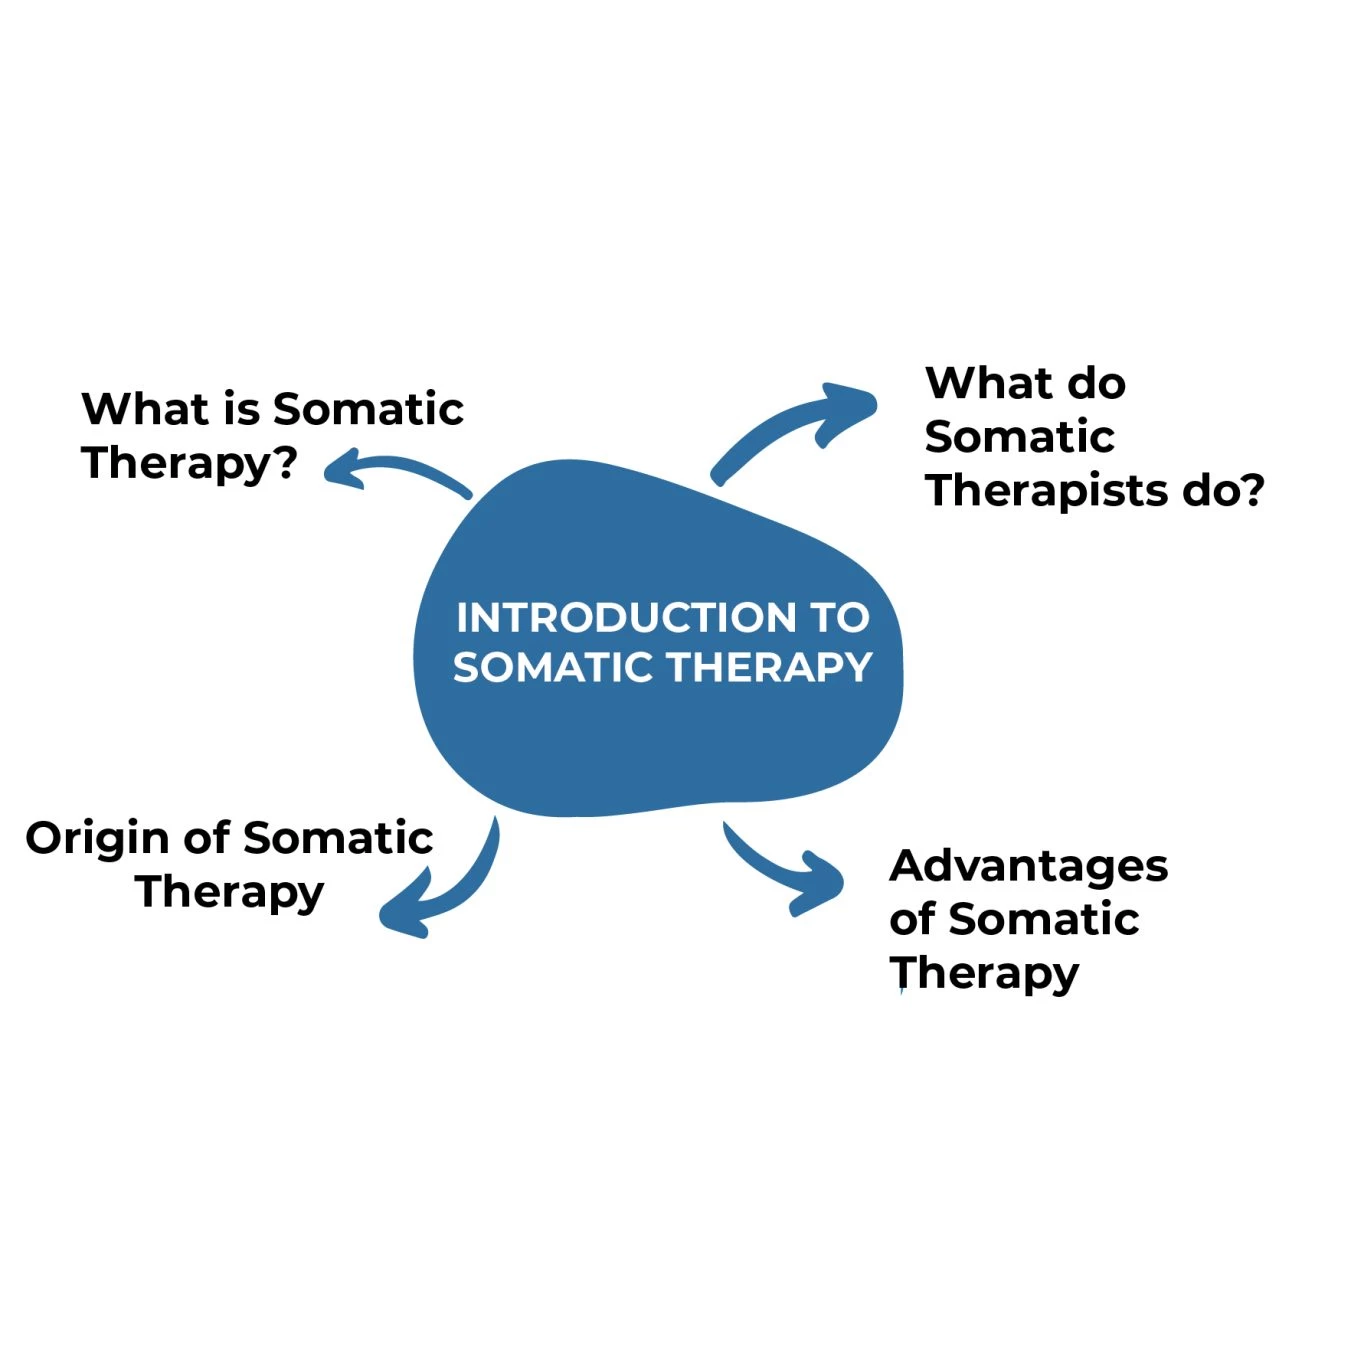 INTRODUCTION TO SOMATIC THERAPY